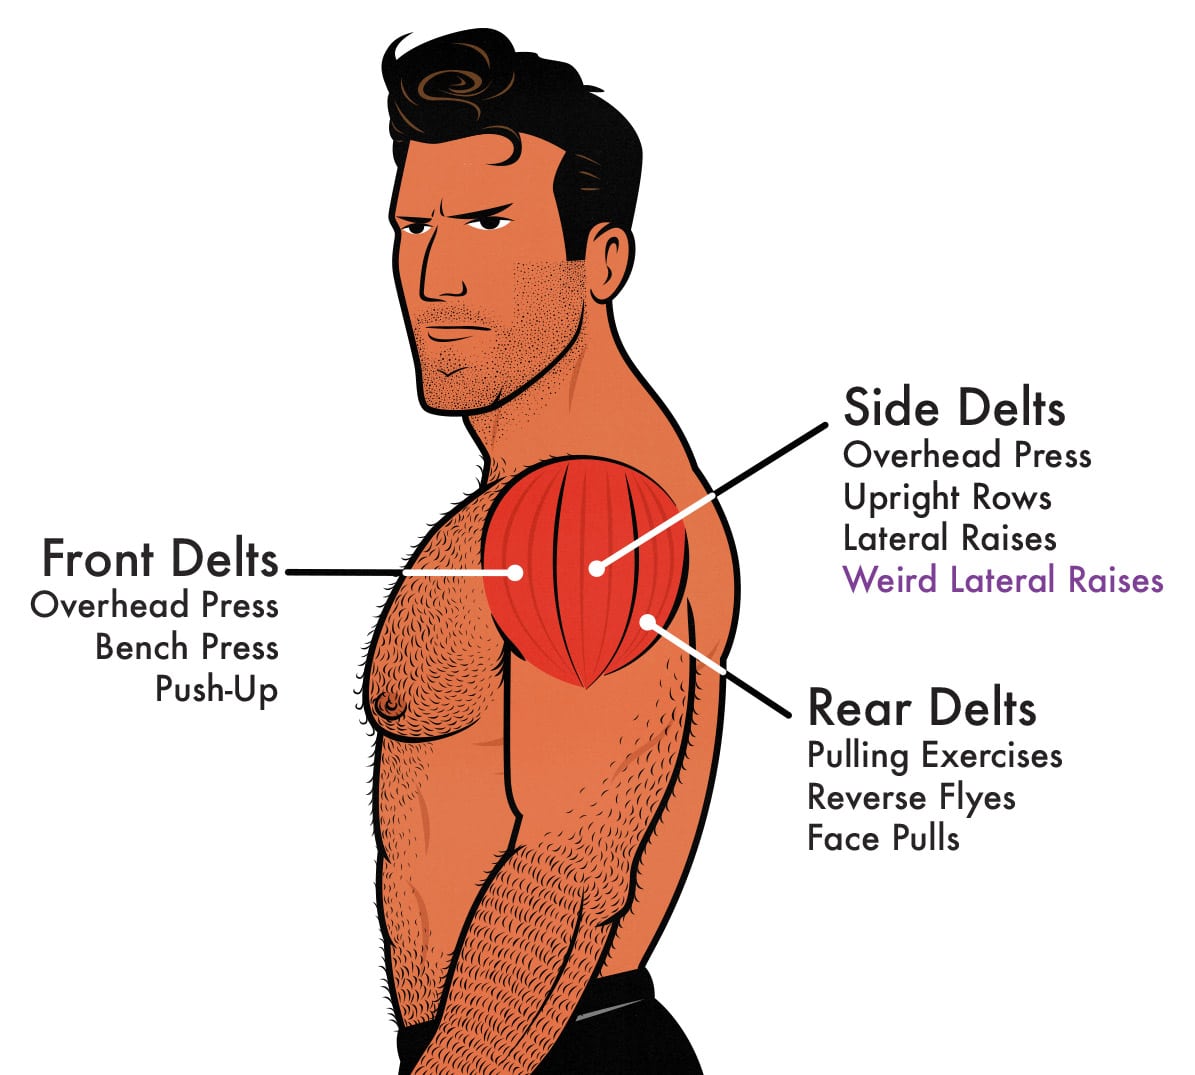 Anatomy diagram showing the side delt muscle (medial deltoid, lateral deltoid) and the exercises that stimulate it.